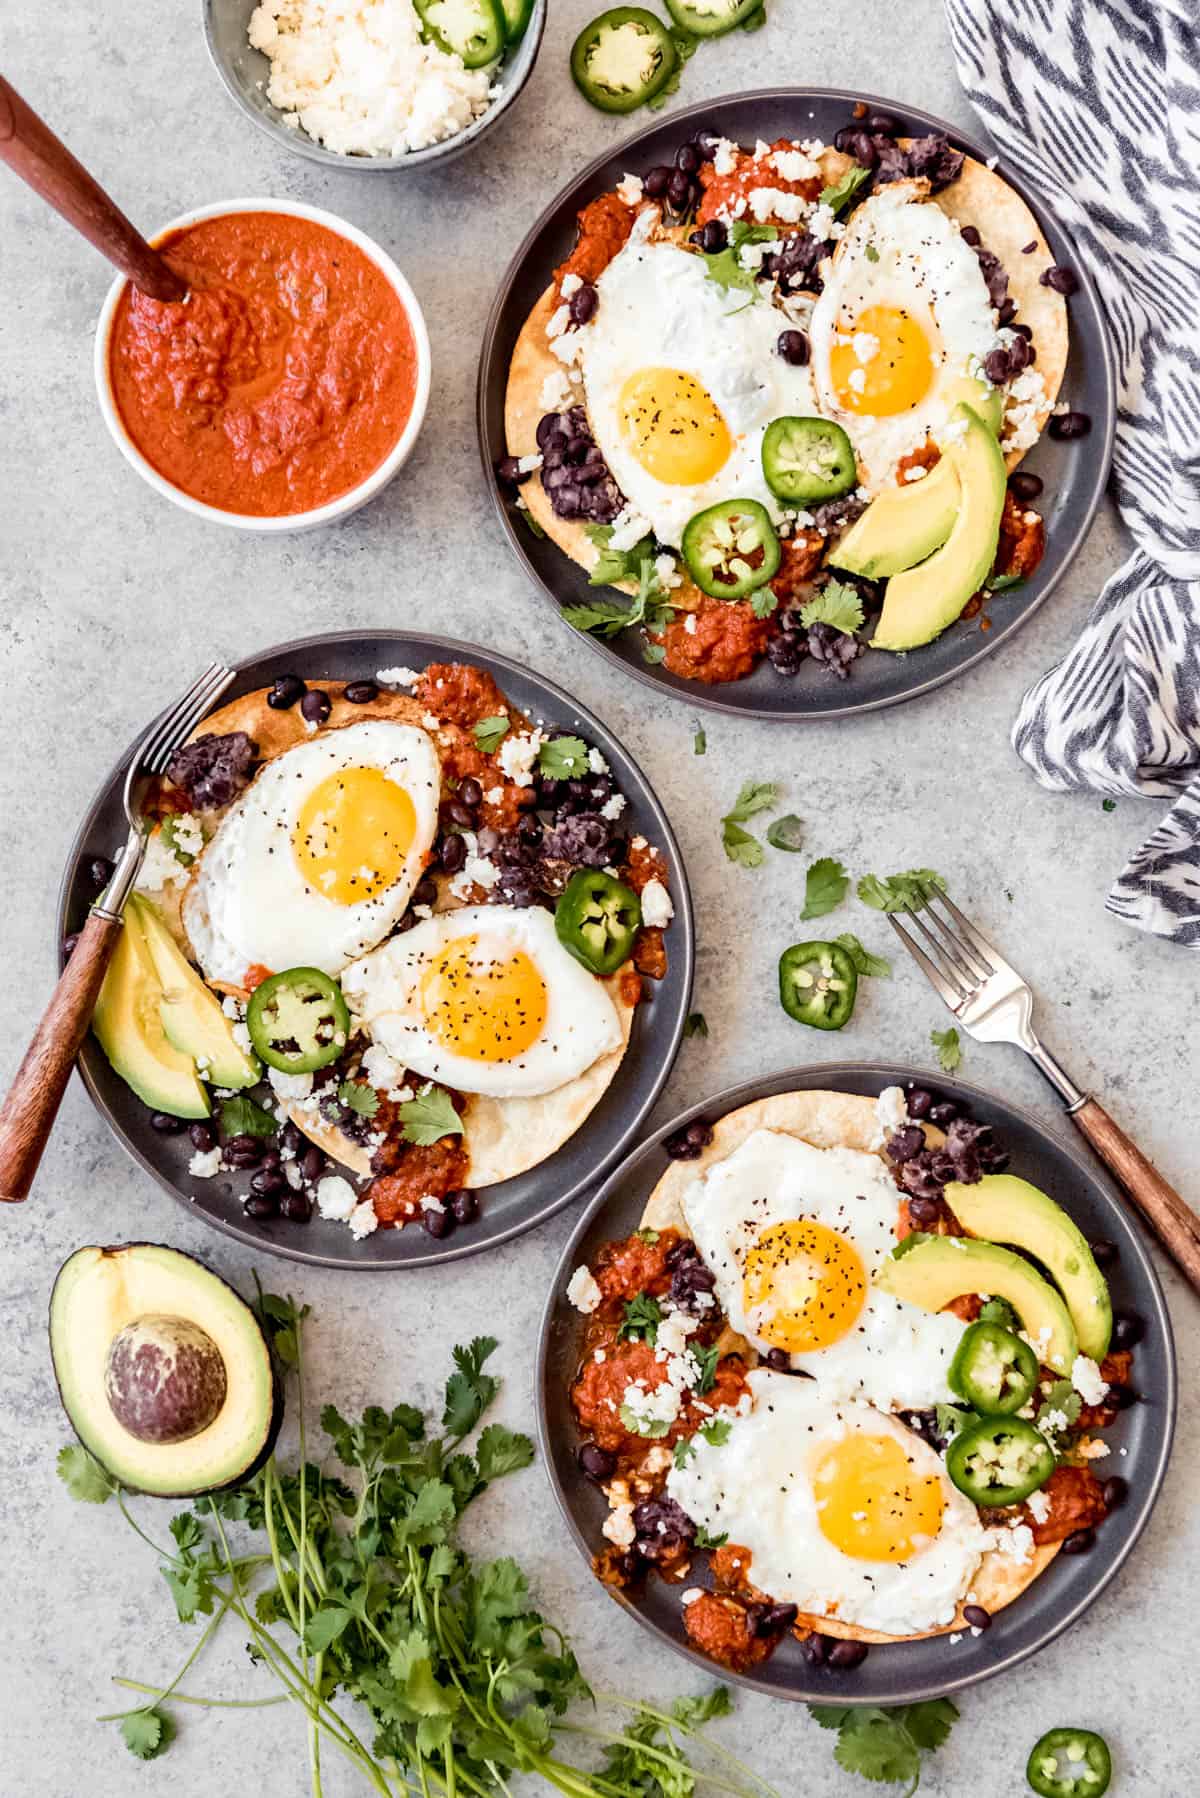 three plates of huevos rancheros served with avocado, jalapeno cheese and cilantro with a side of homemade ranchero sauce in a bowl